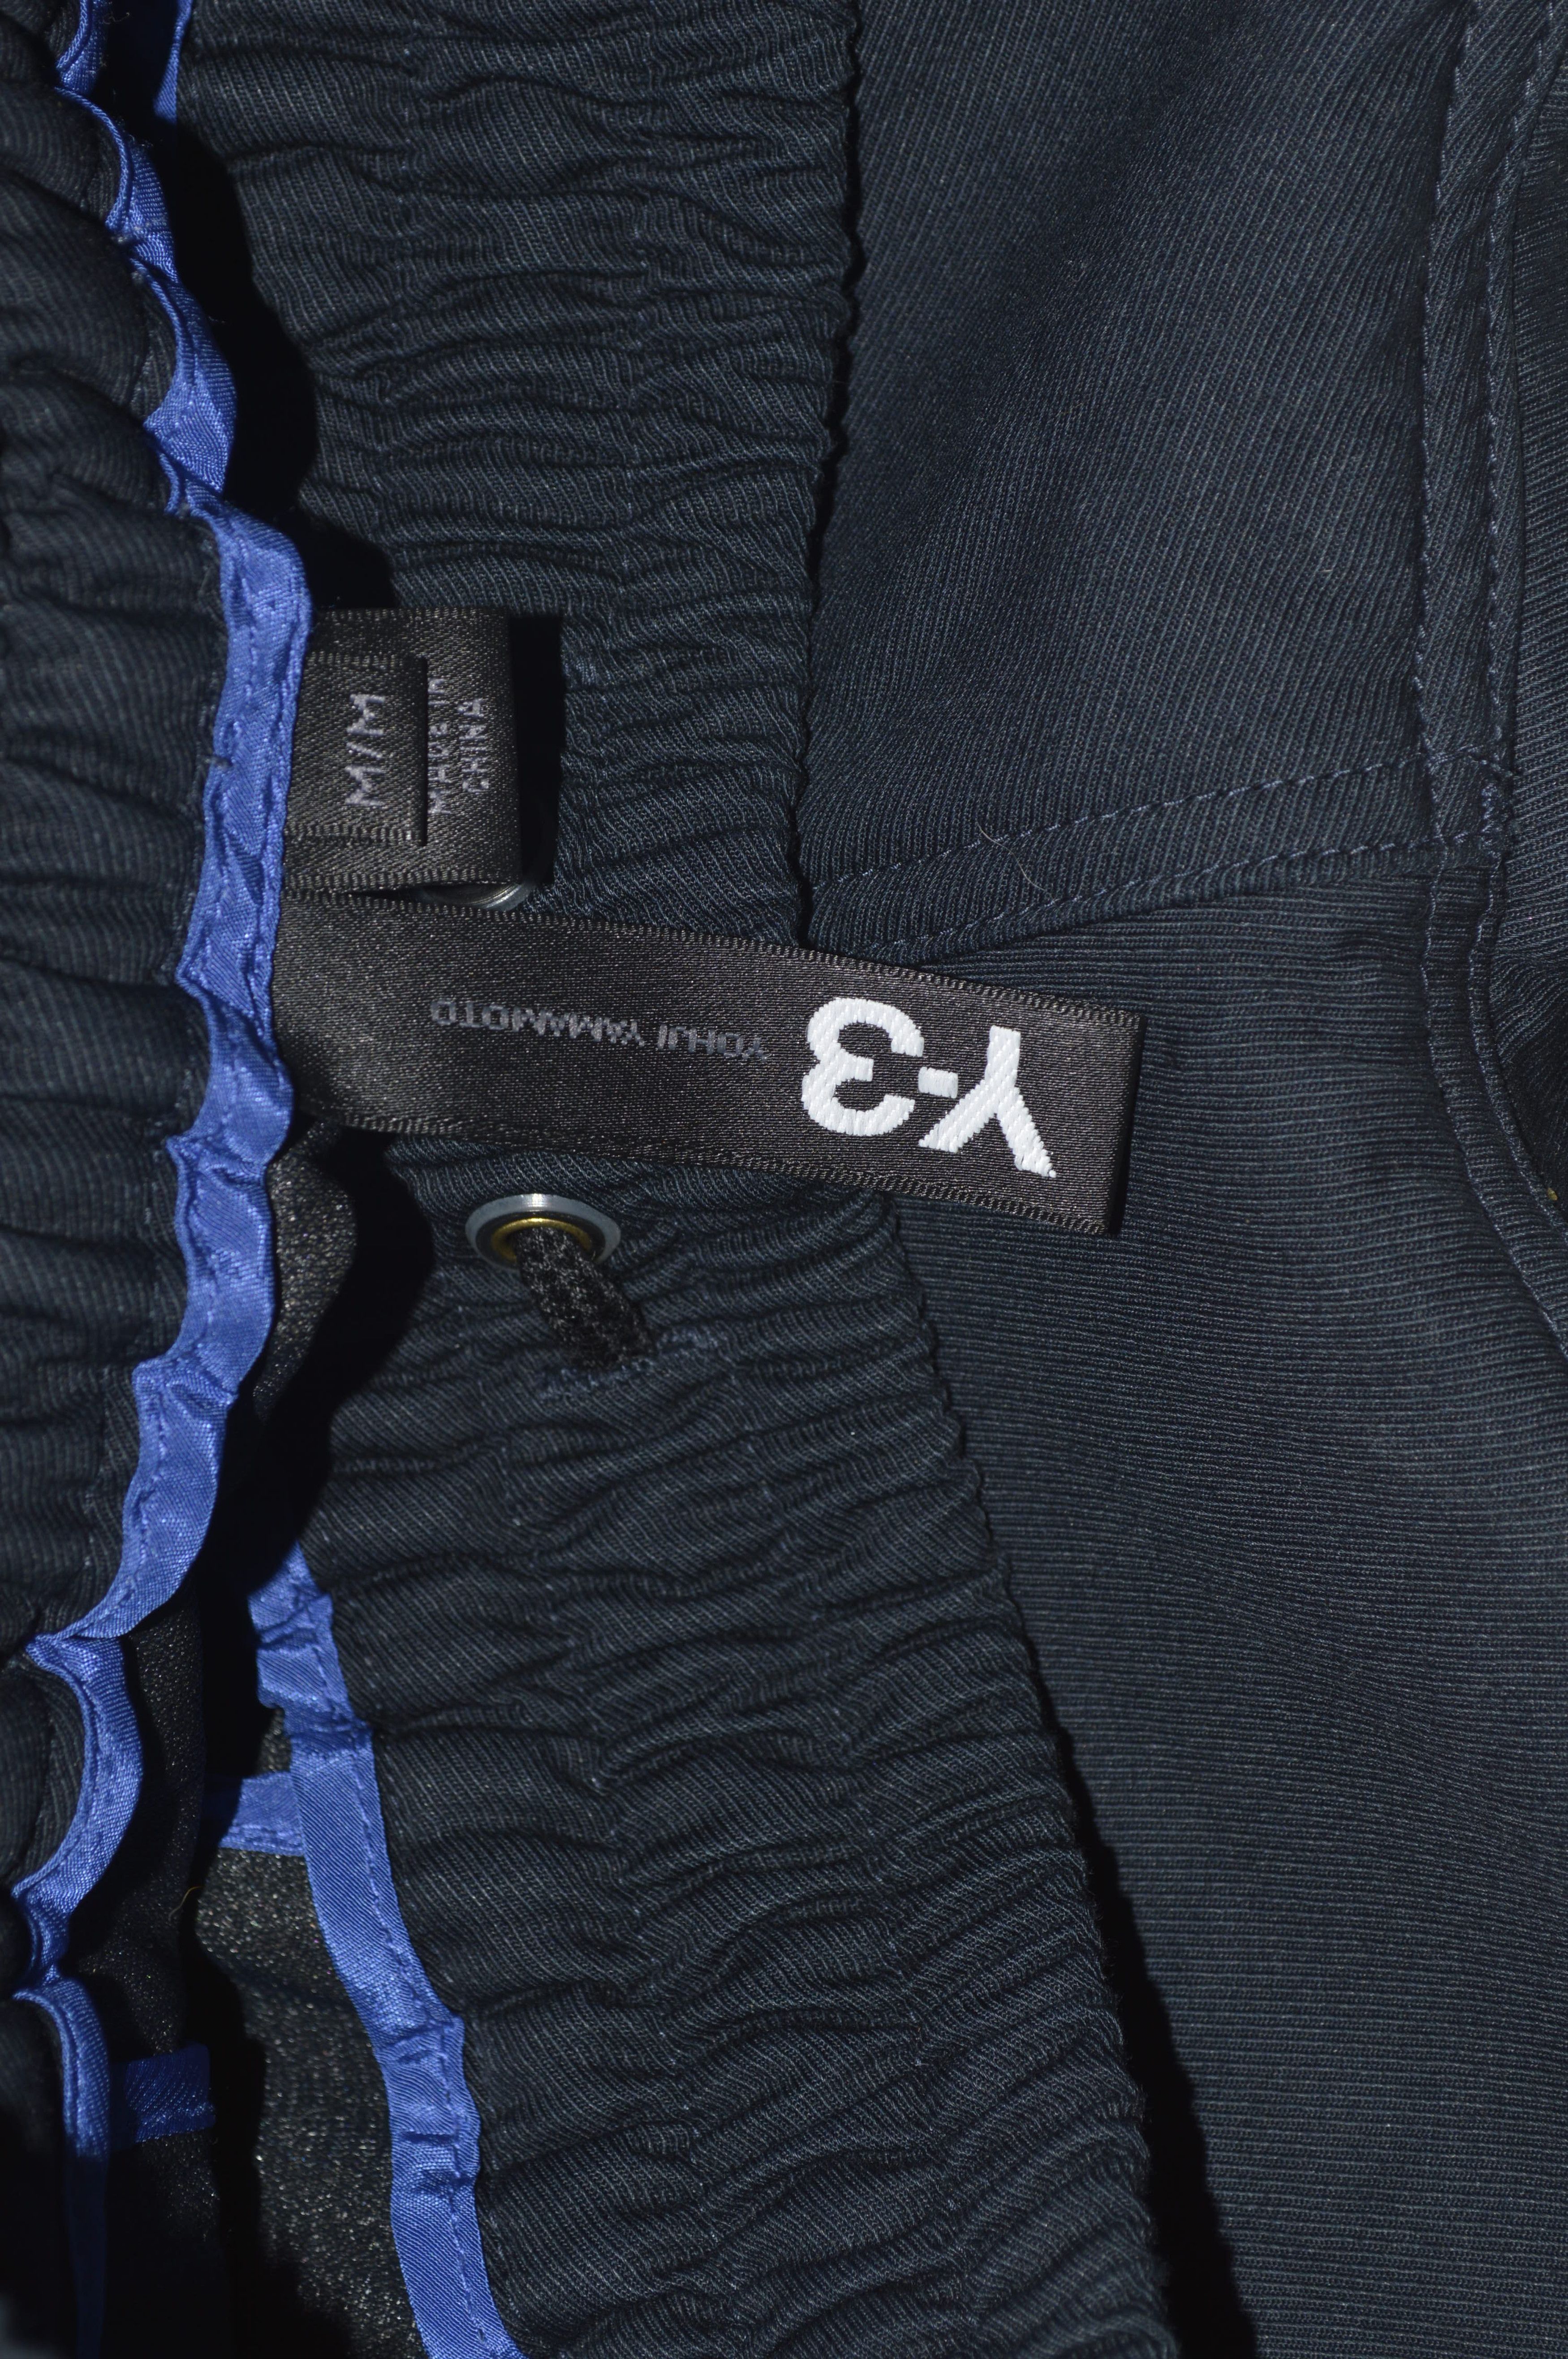 Y-3 (priced to sell)Drop Crotch Shorts Size US 30 / EU 46 - 5 Thumbnail